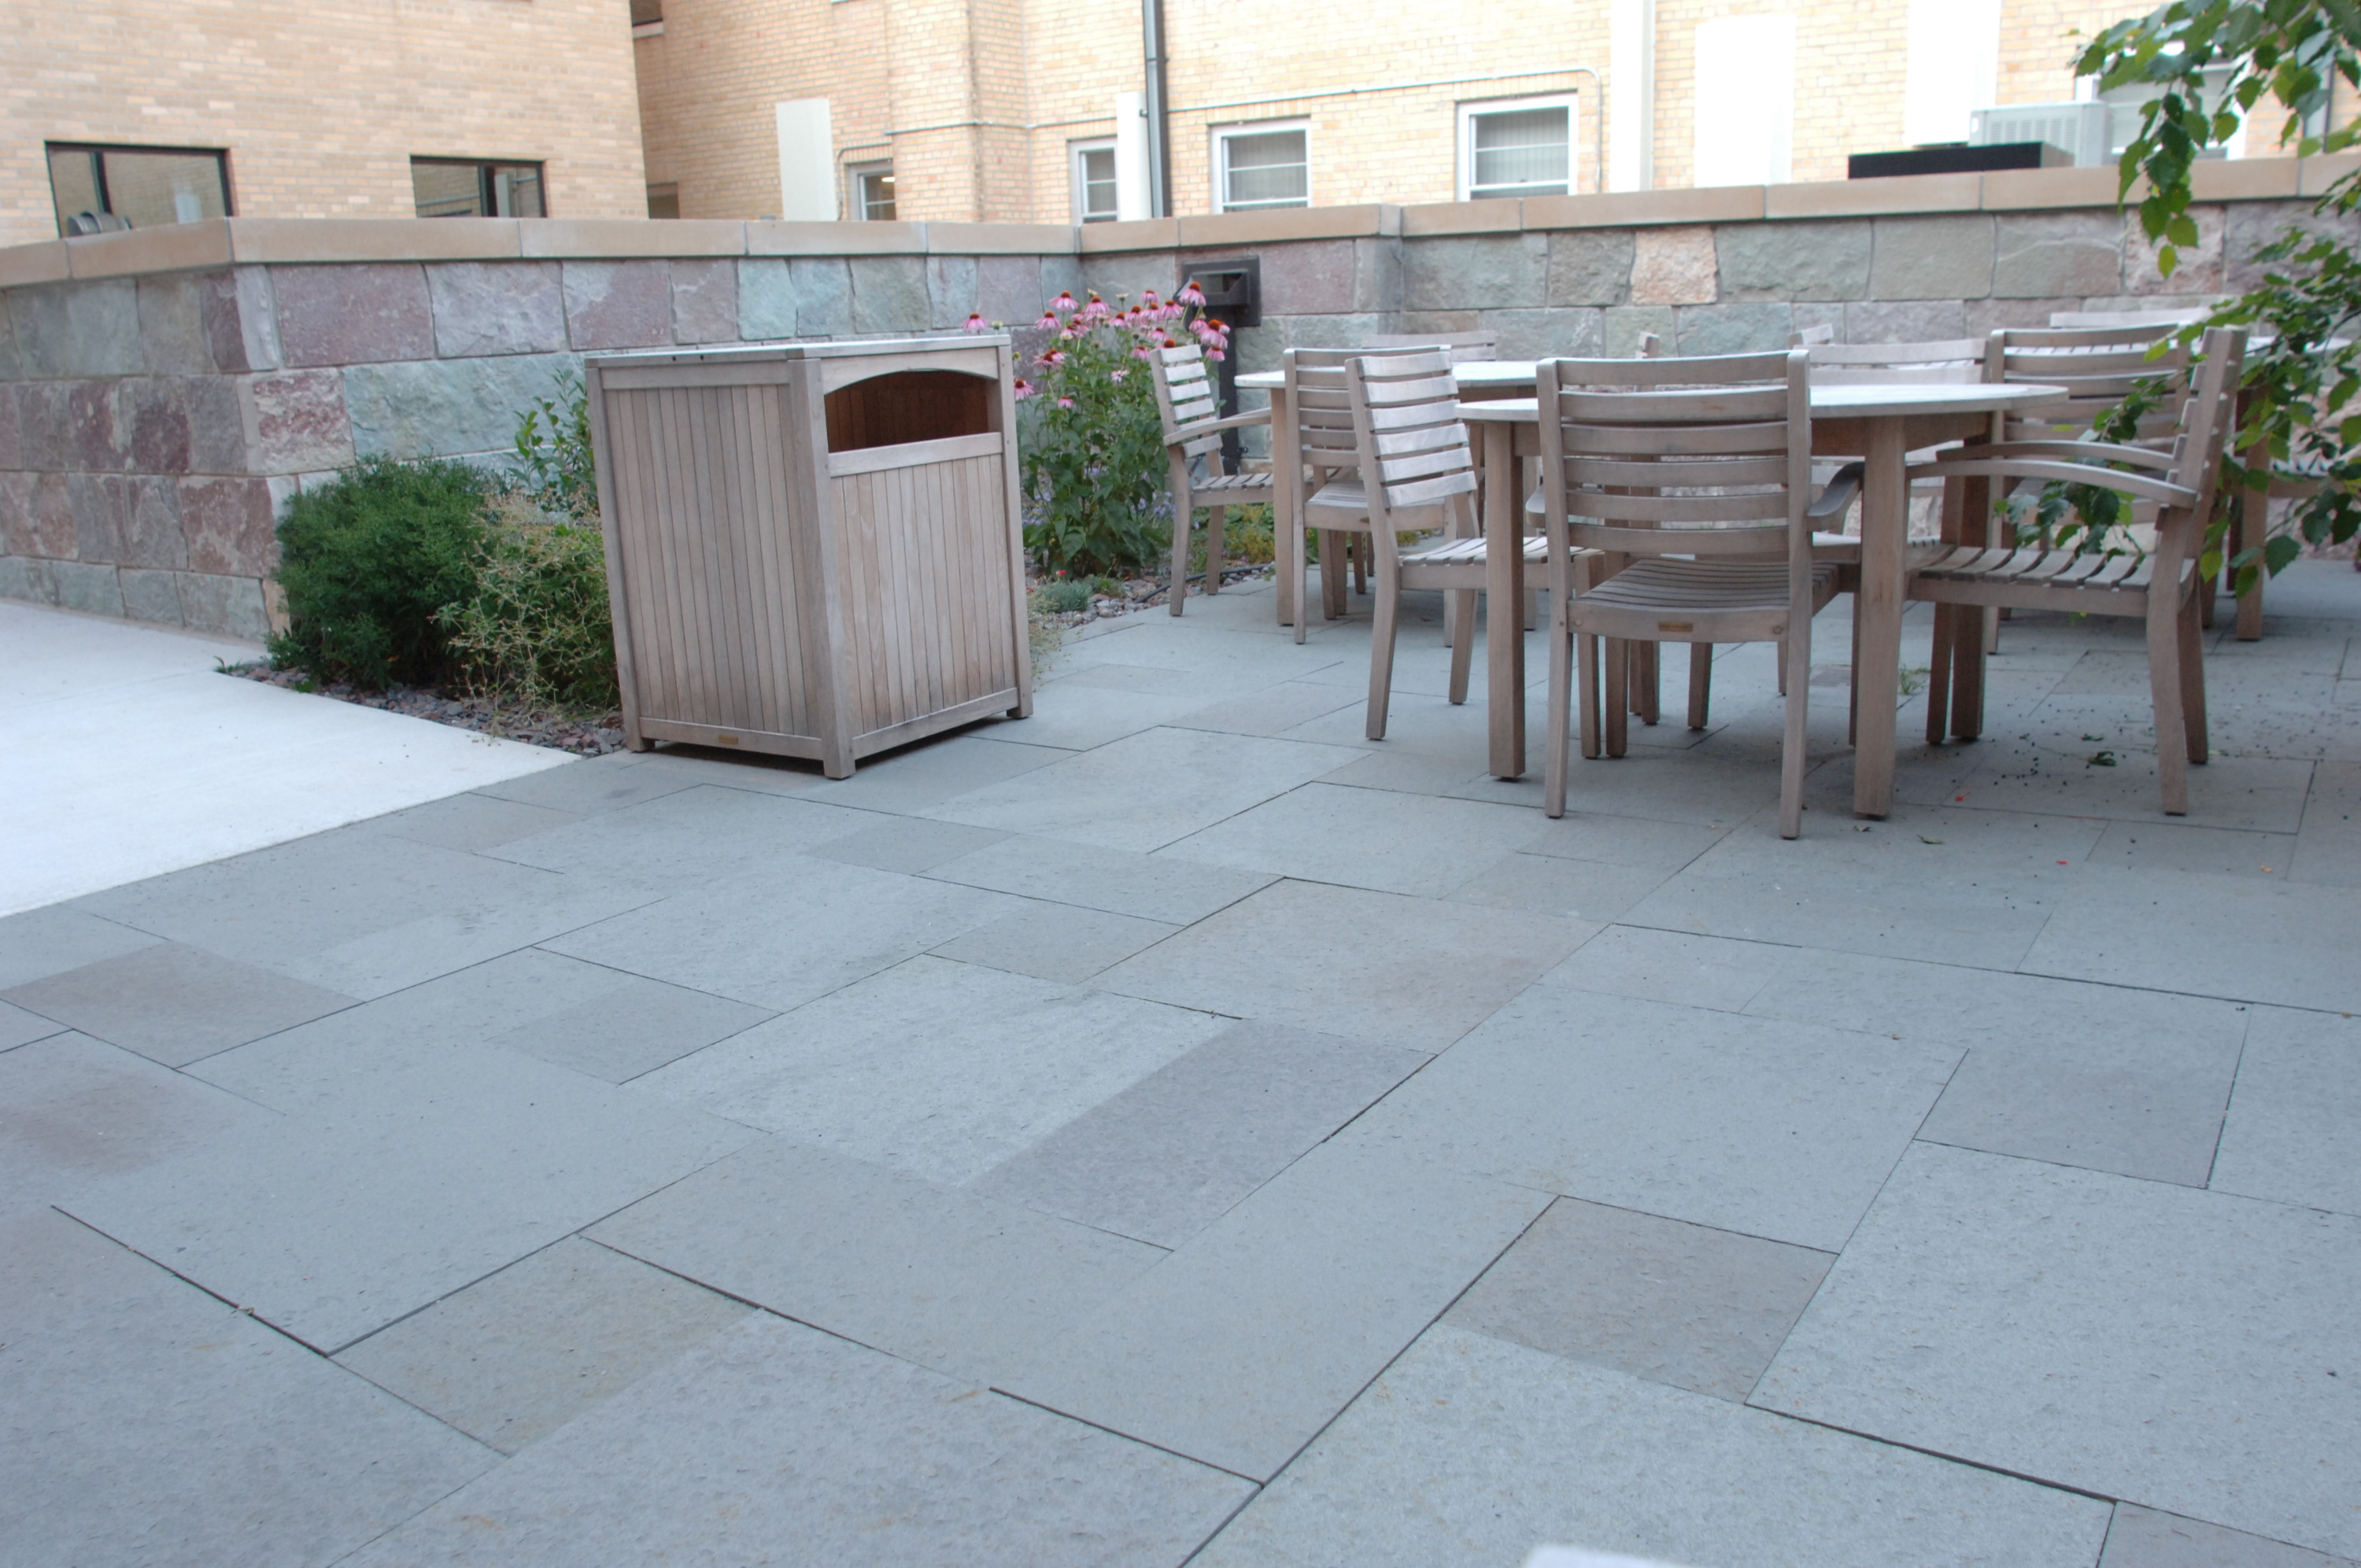 bluestone pavers have a smooth, natural cleft finish that is rich with NRUYIGA